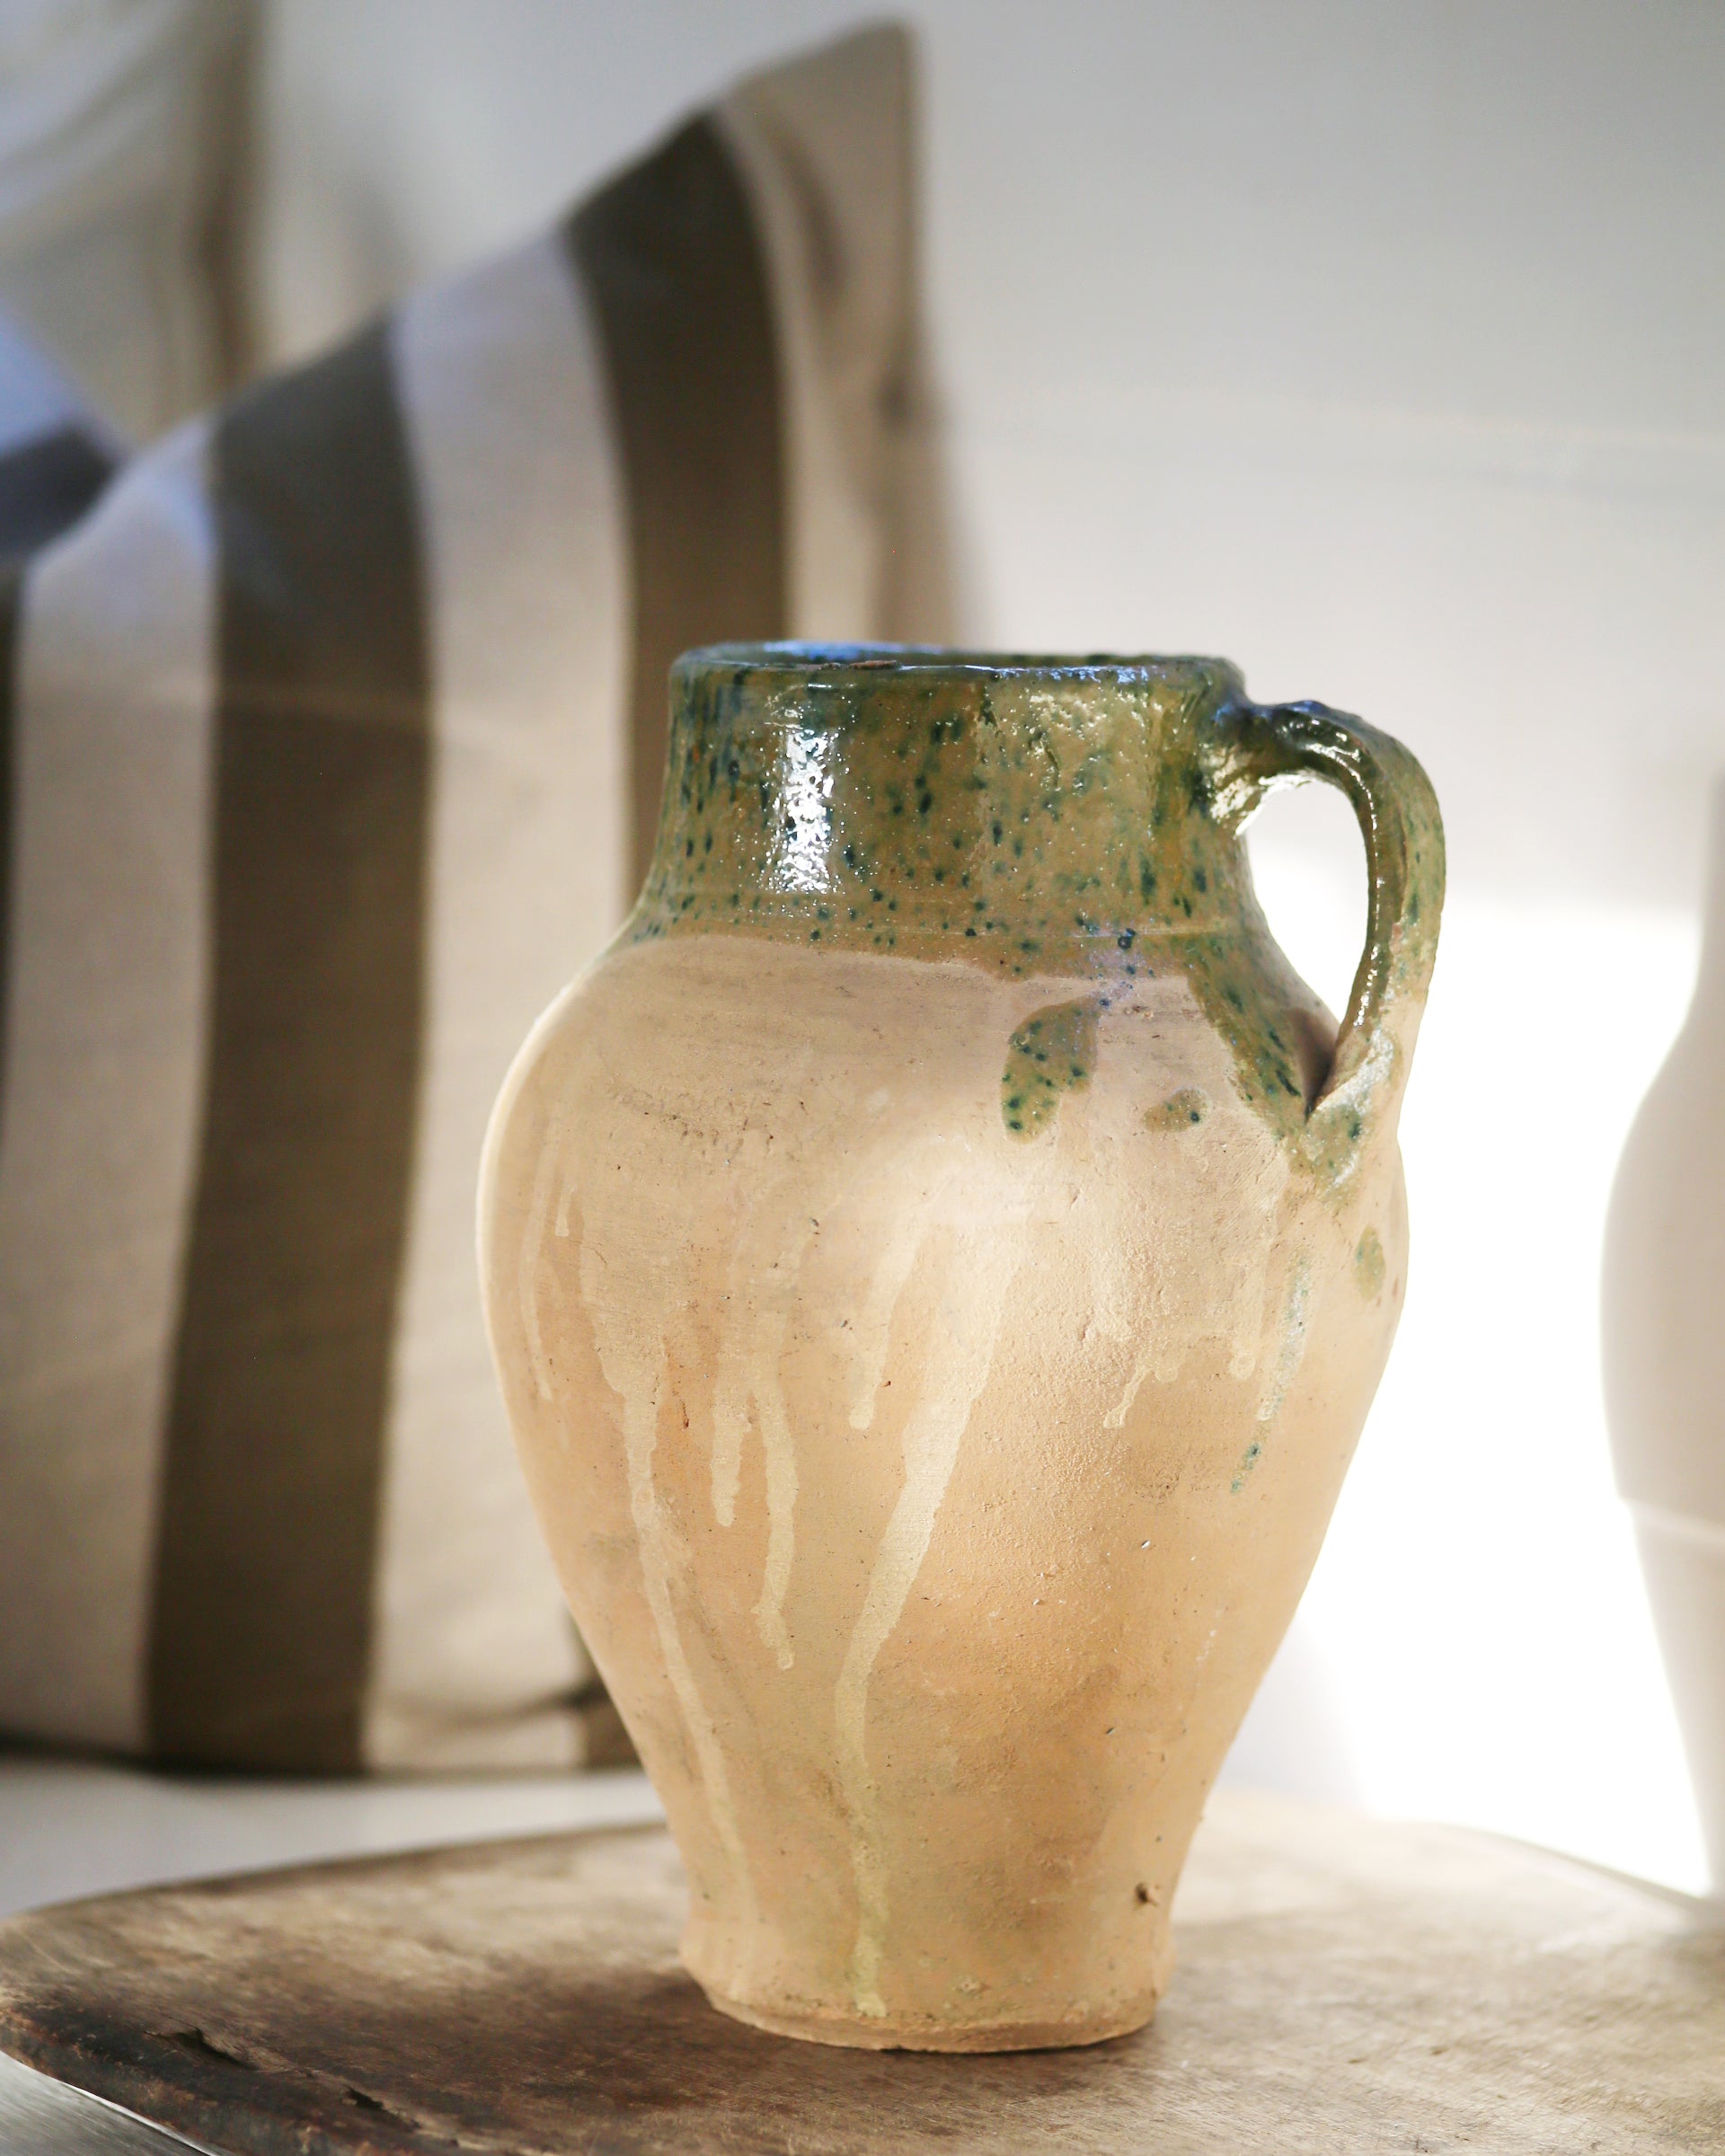 Antique clay pitcher jug with green glazed detail